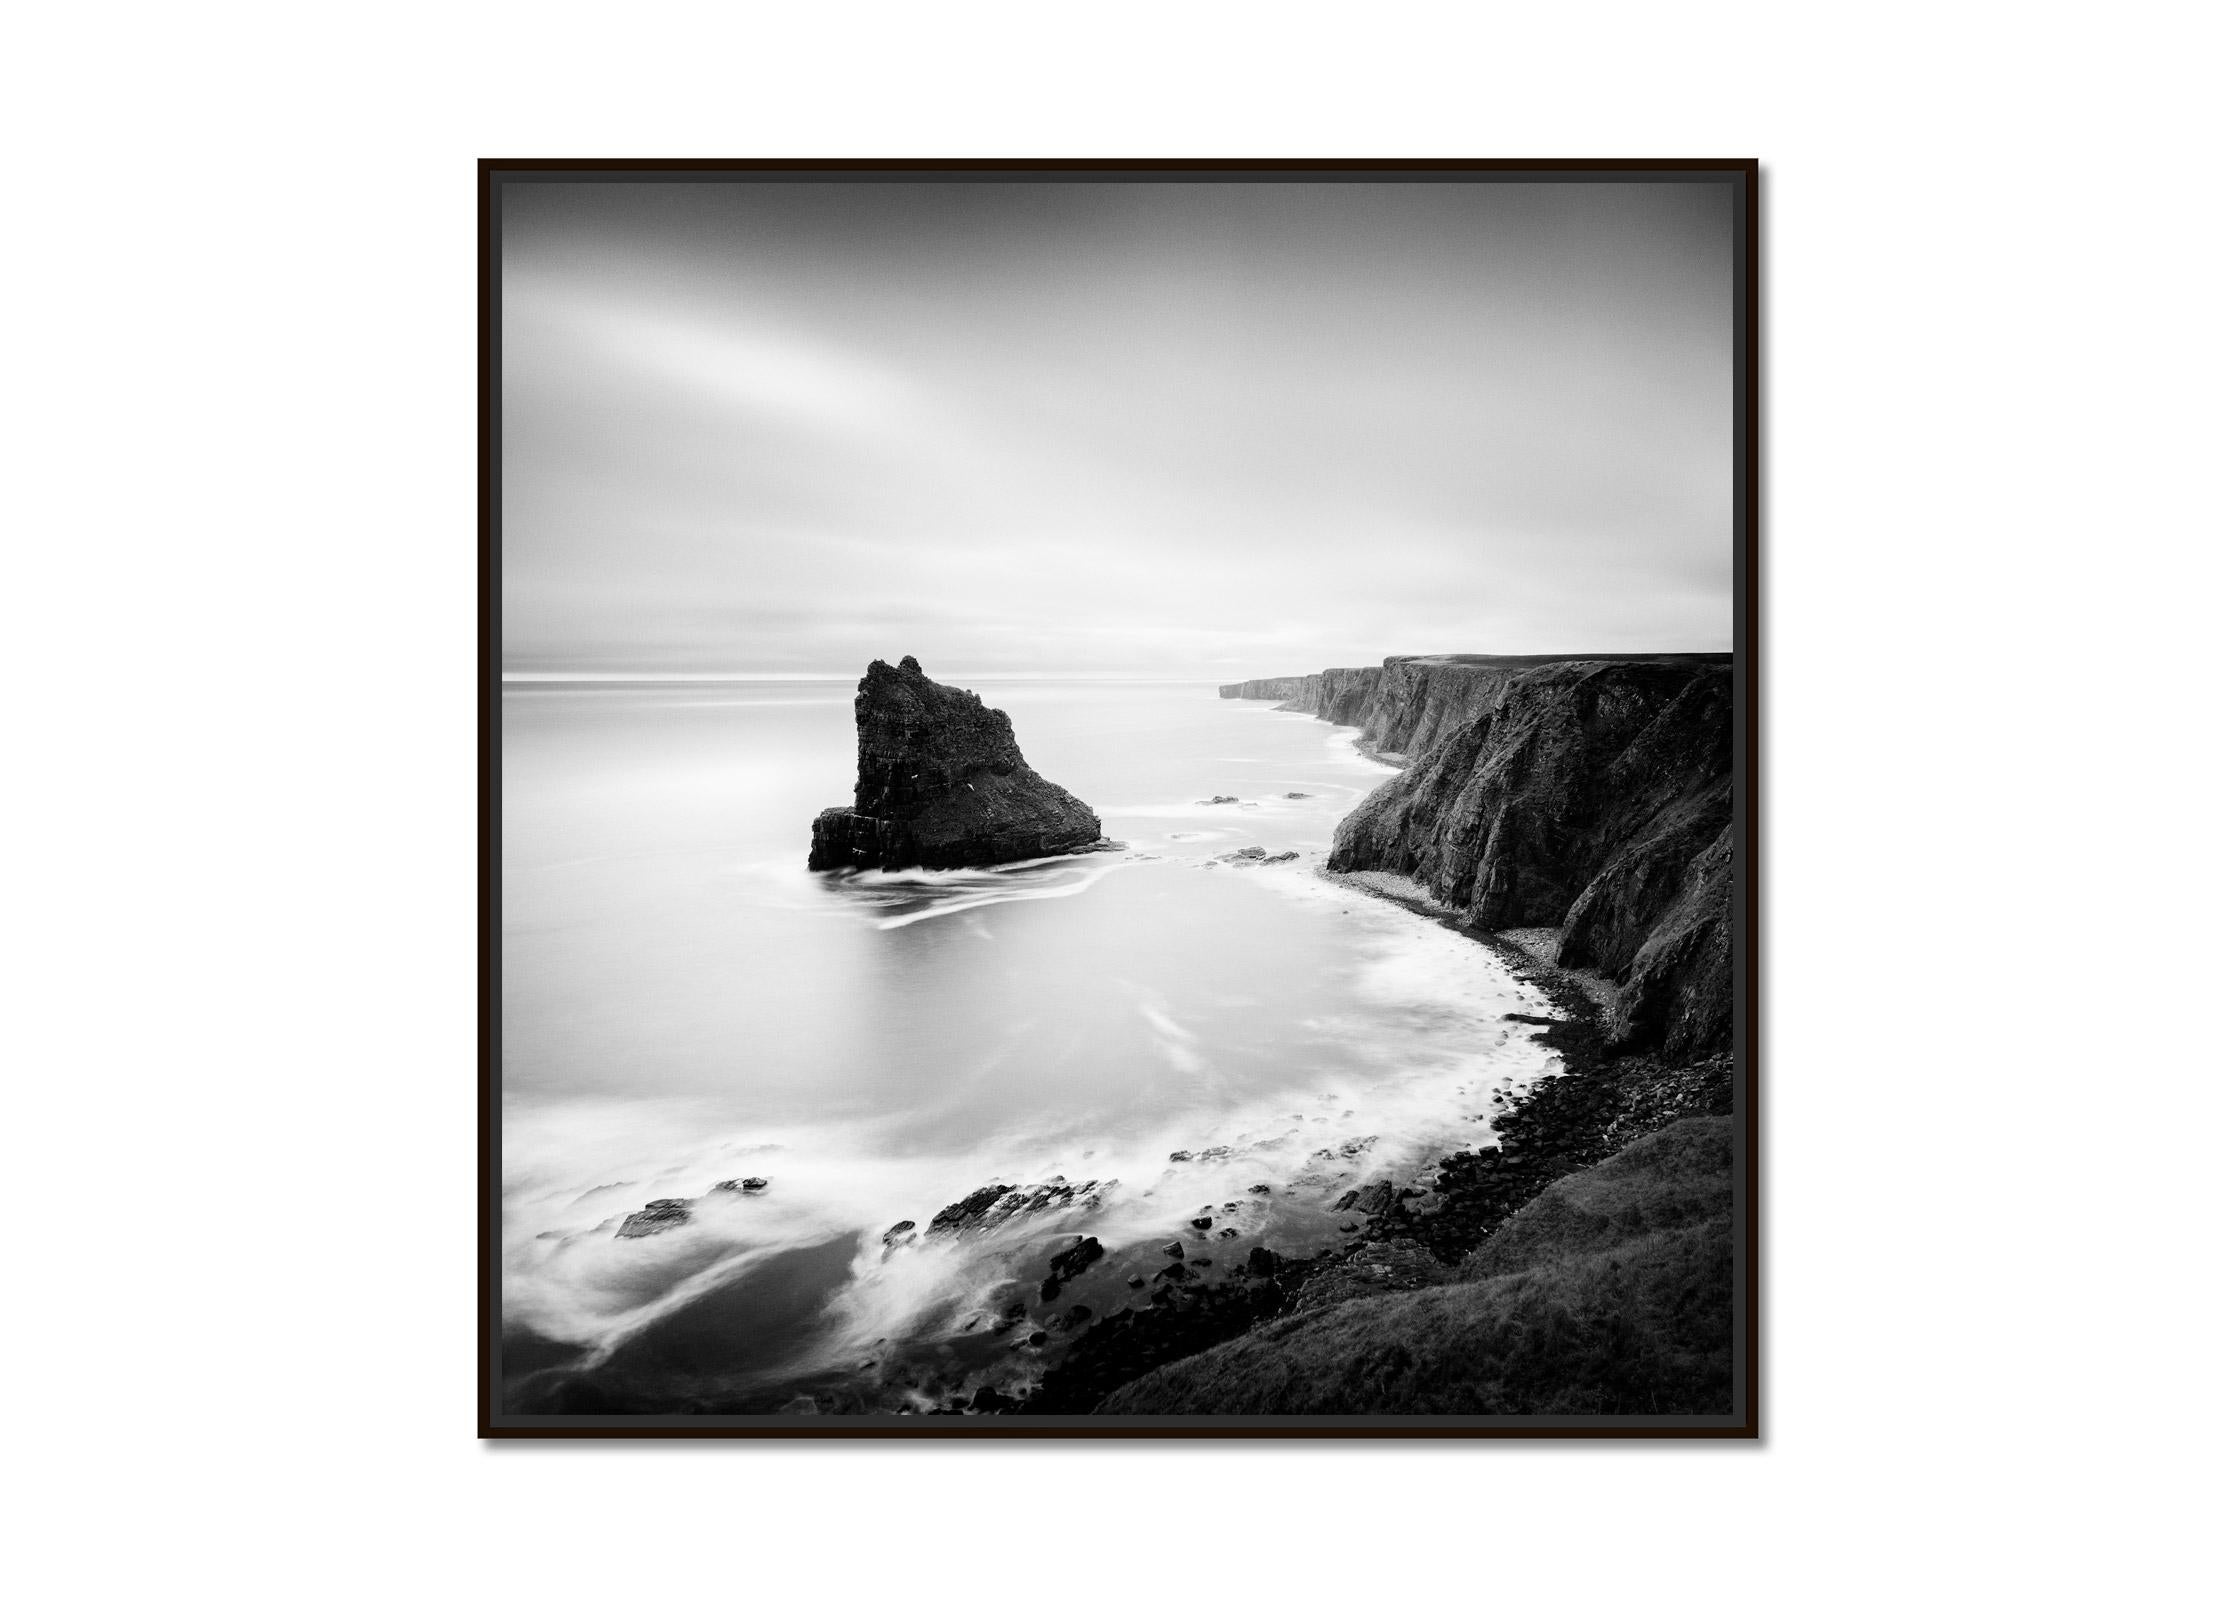 Surreal Moment, scottish coastline cliff, black and white photography, landscape - Photograph by Gerald Berghammer